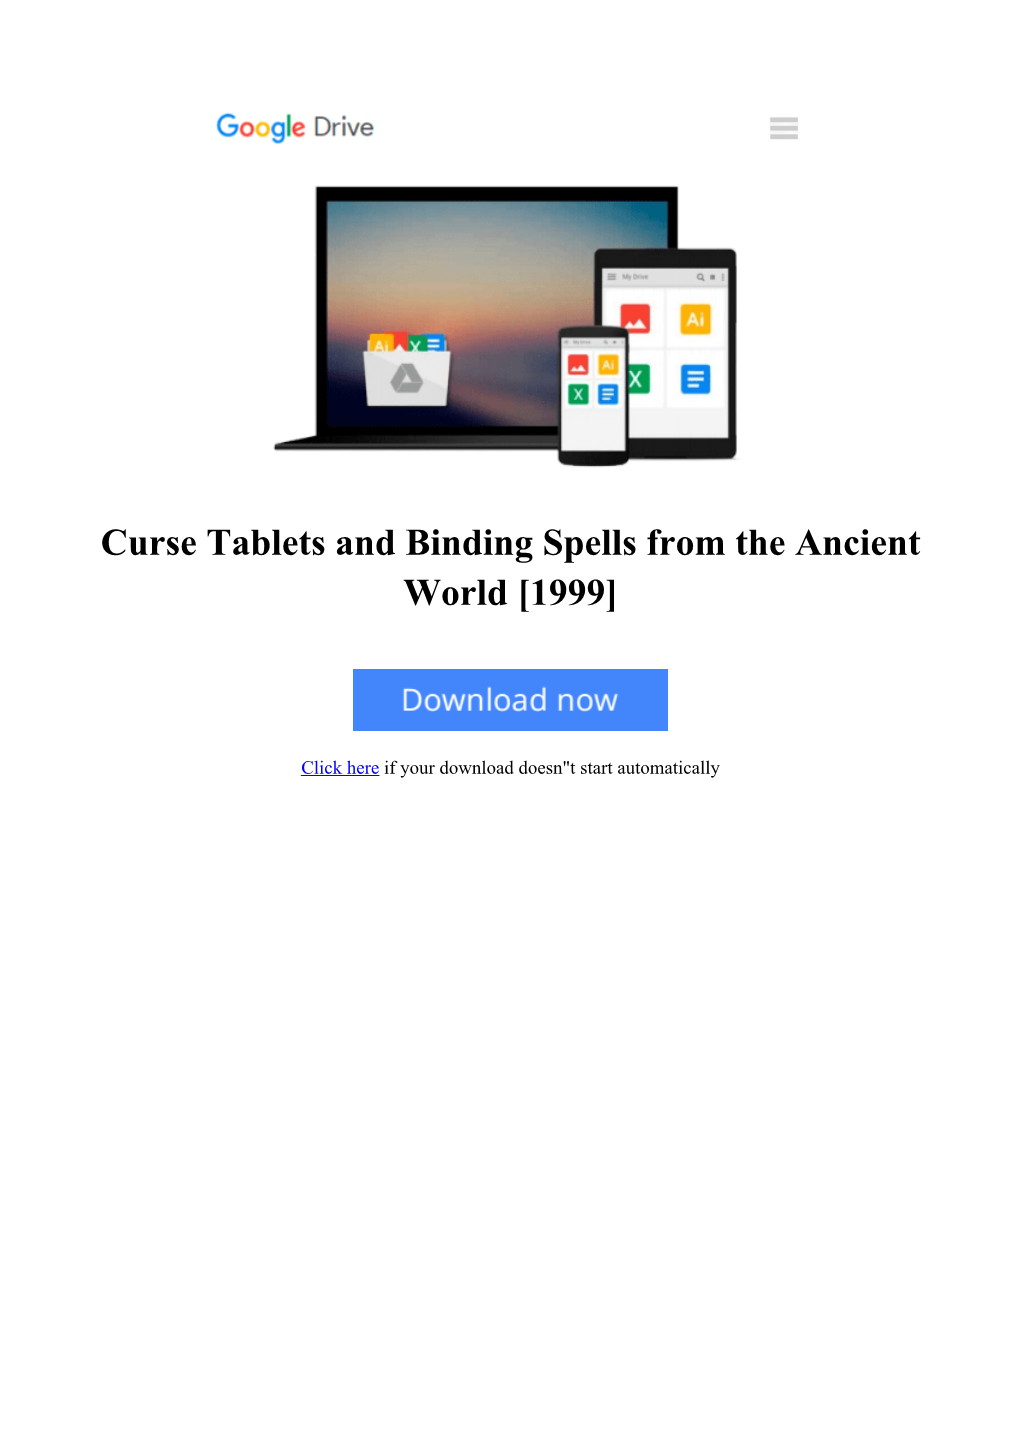 Curse Tablets and Binding Spells from the Ancient World [1999]